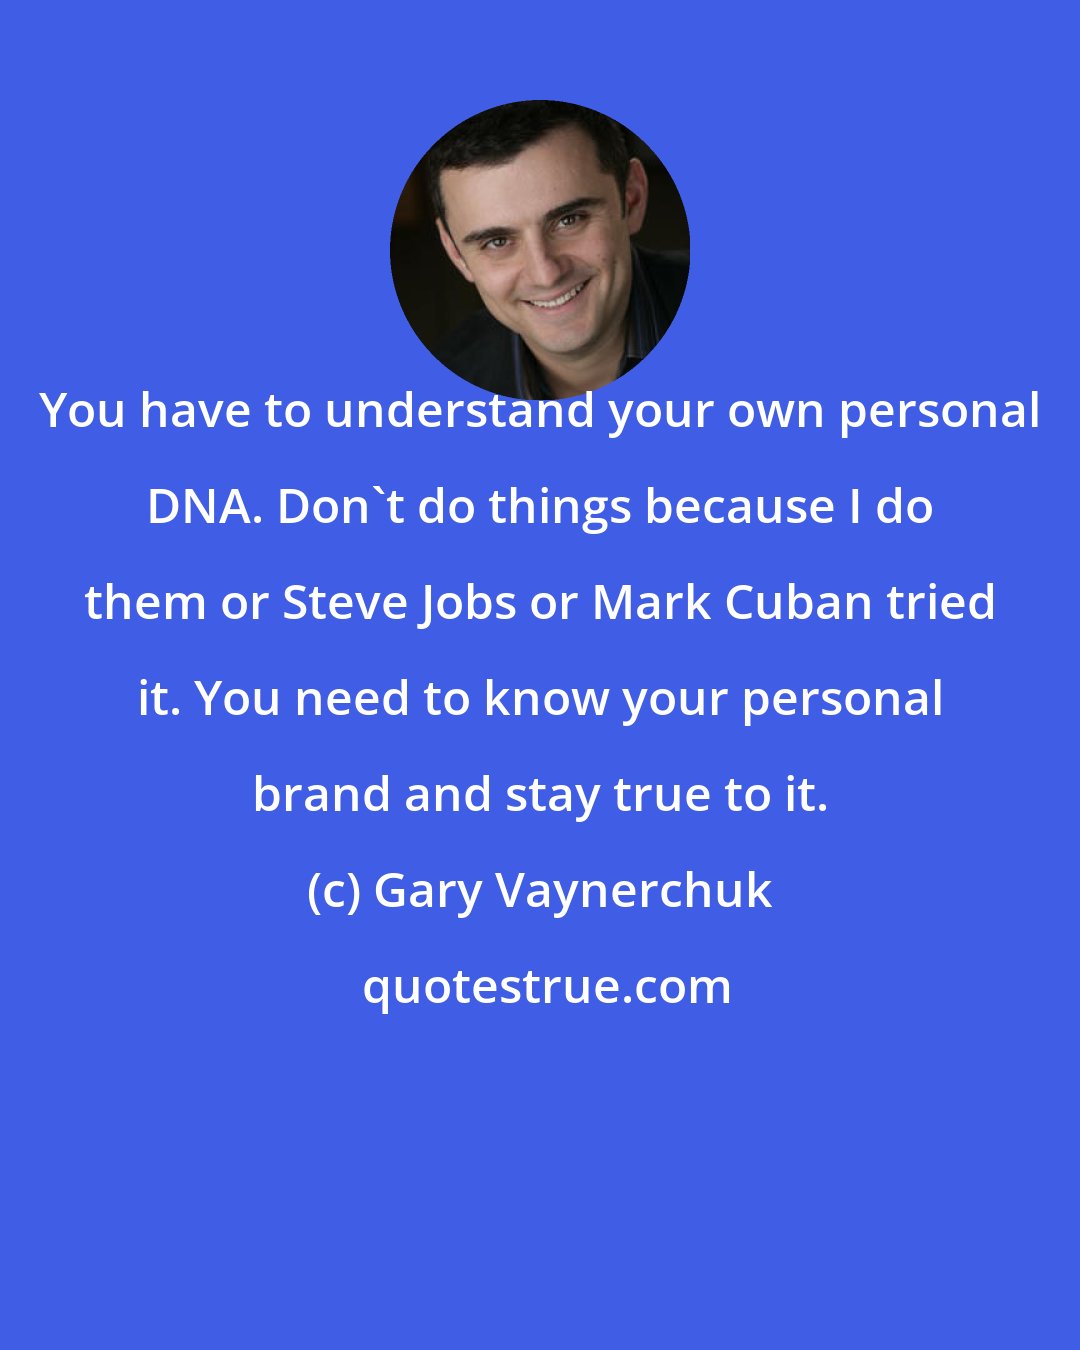 Gary Vaynerchuk: You have to understand your own personal DNA. Don't do things because I do them or Steve Jobs or Mark Cuban tried it. You need to know your personal brand and stay true to it.